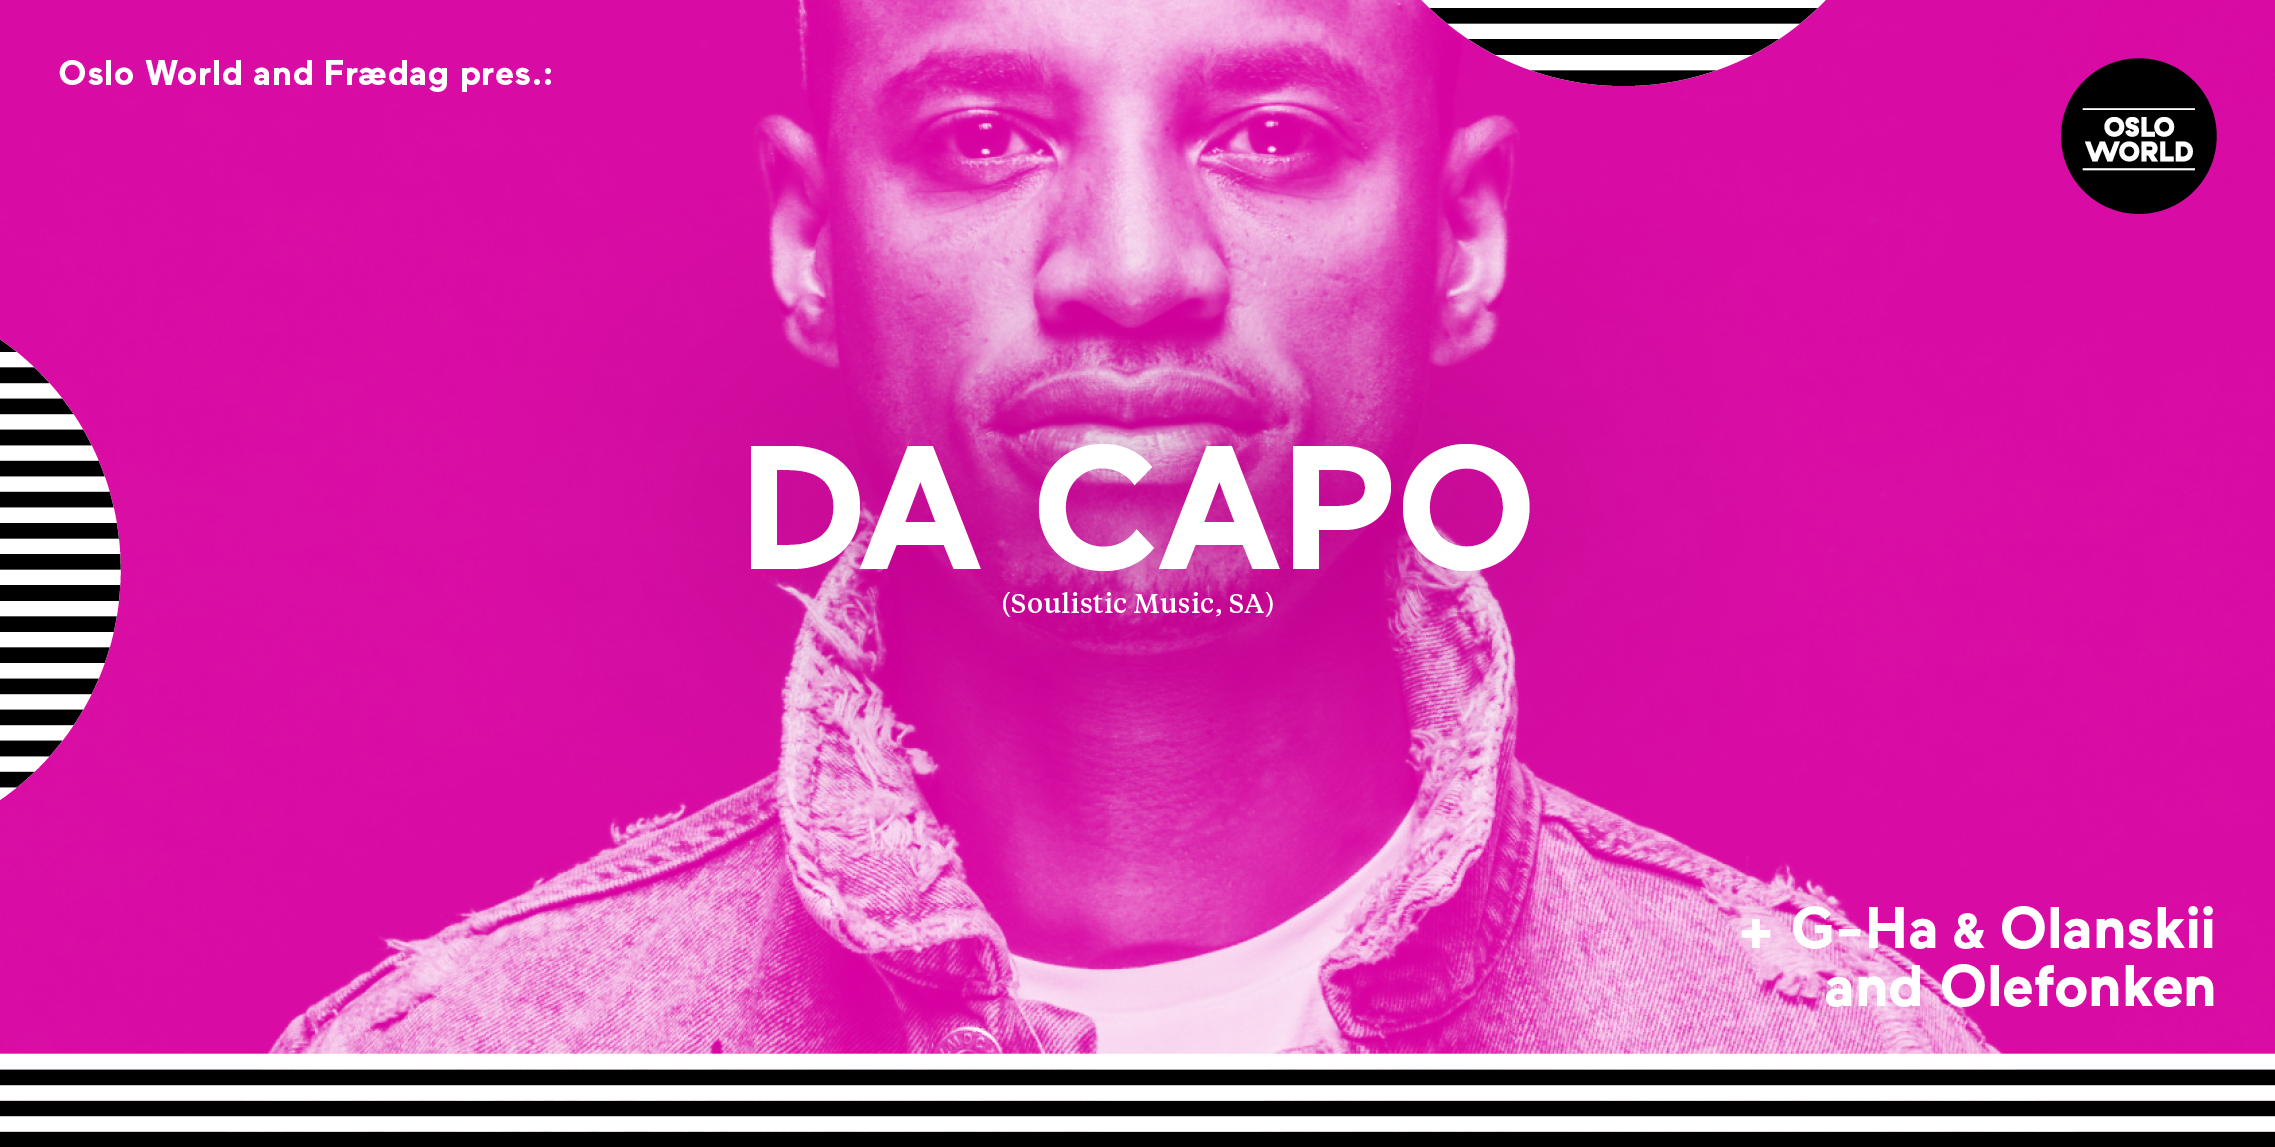 Da Capo stands in for Black Motion during Oslo World